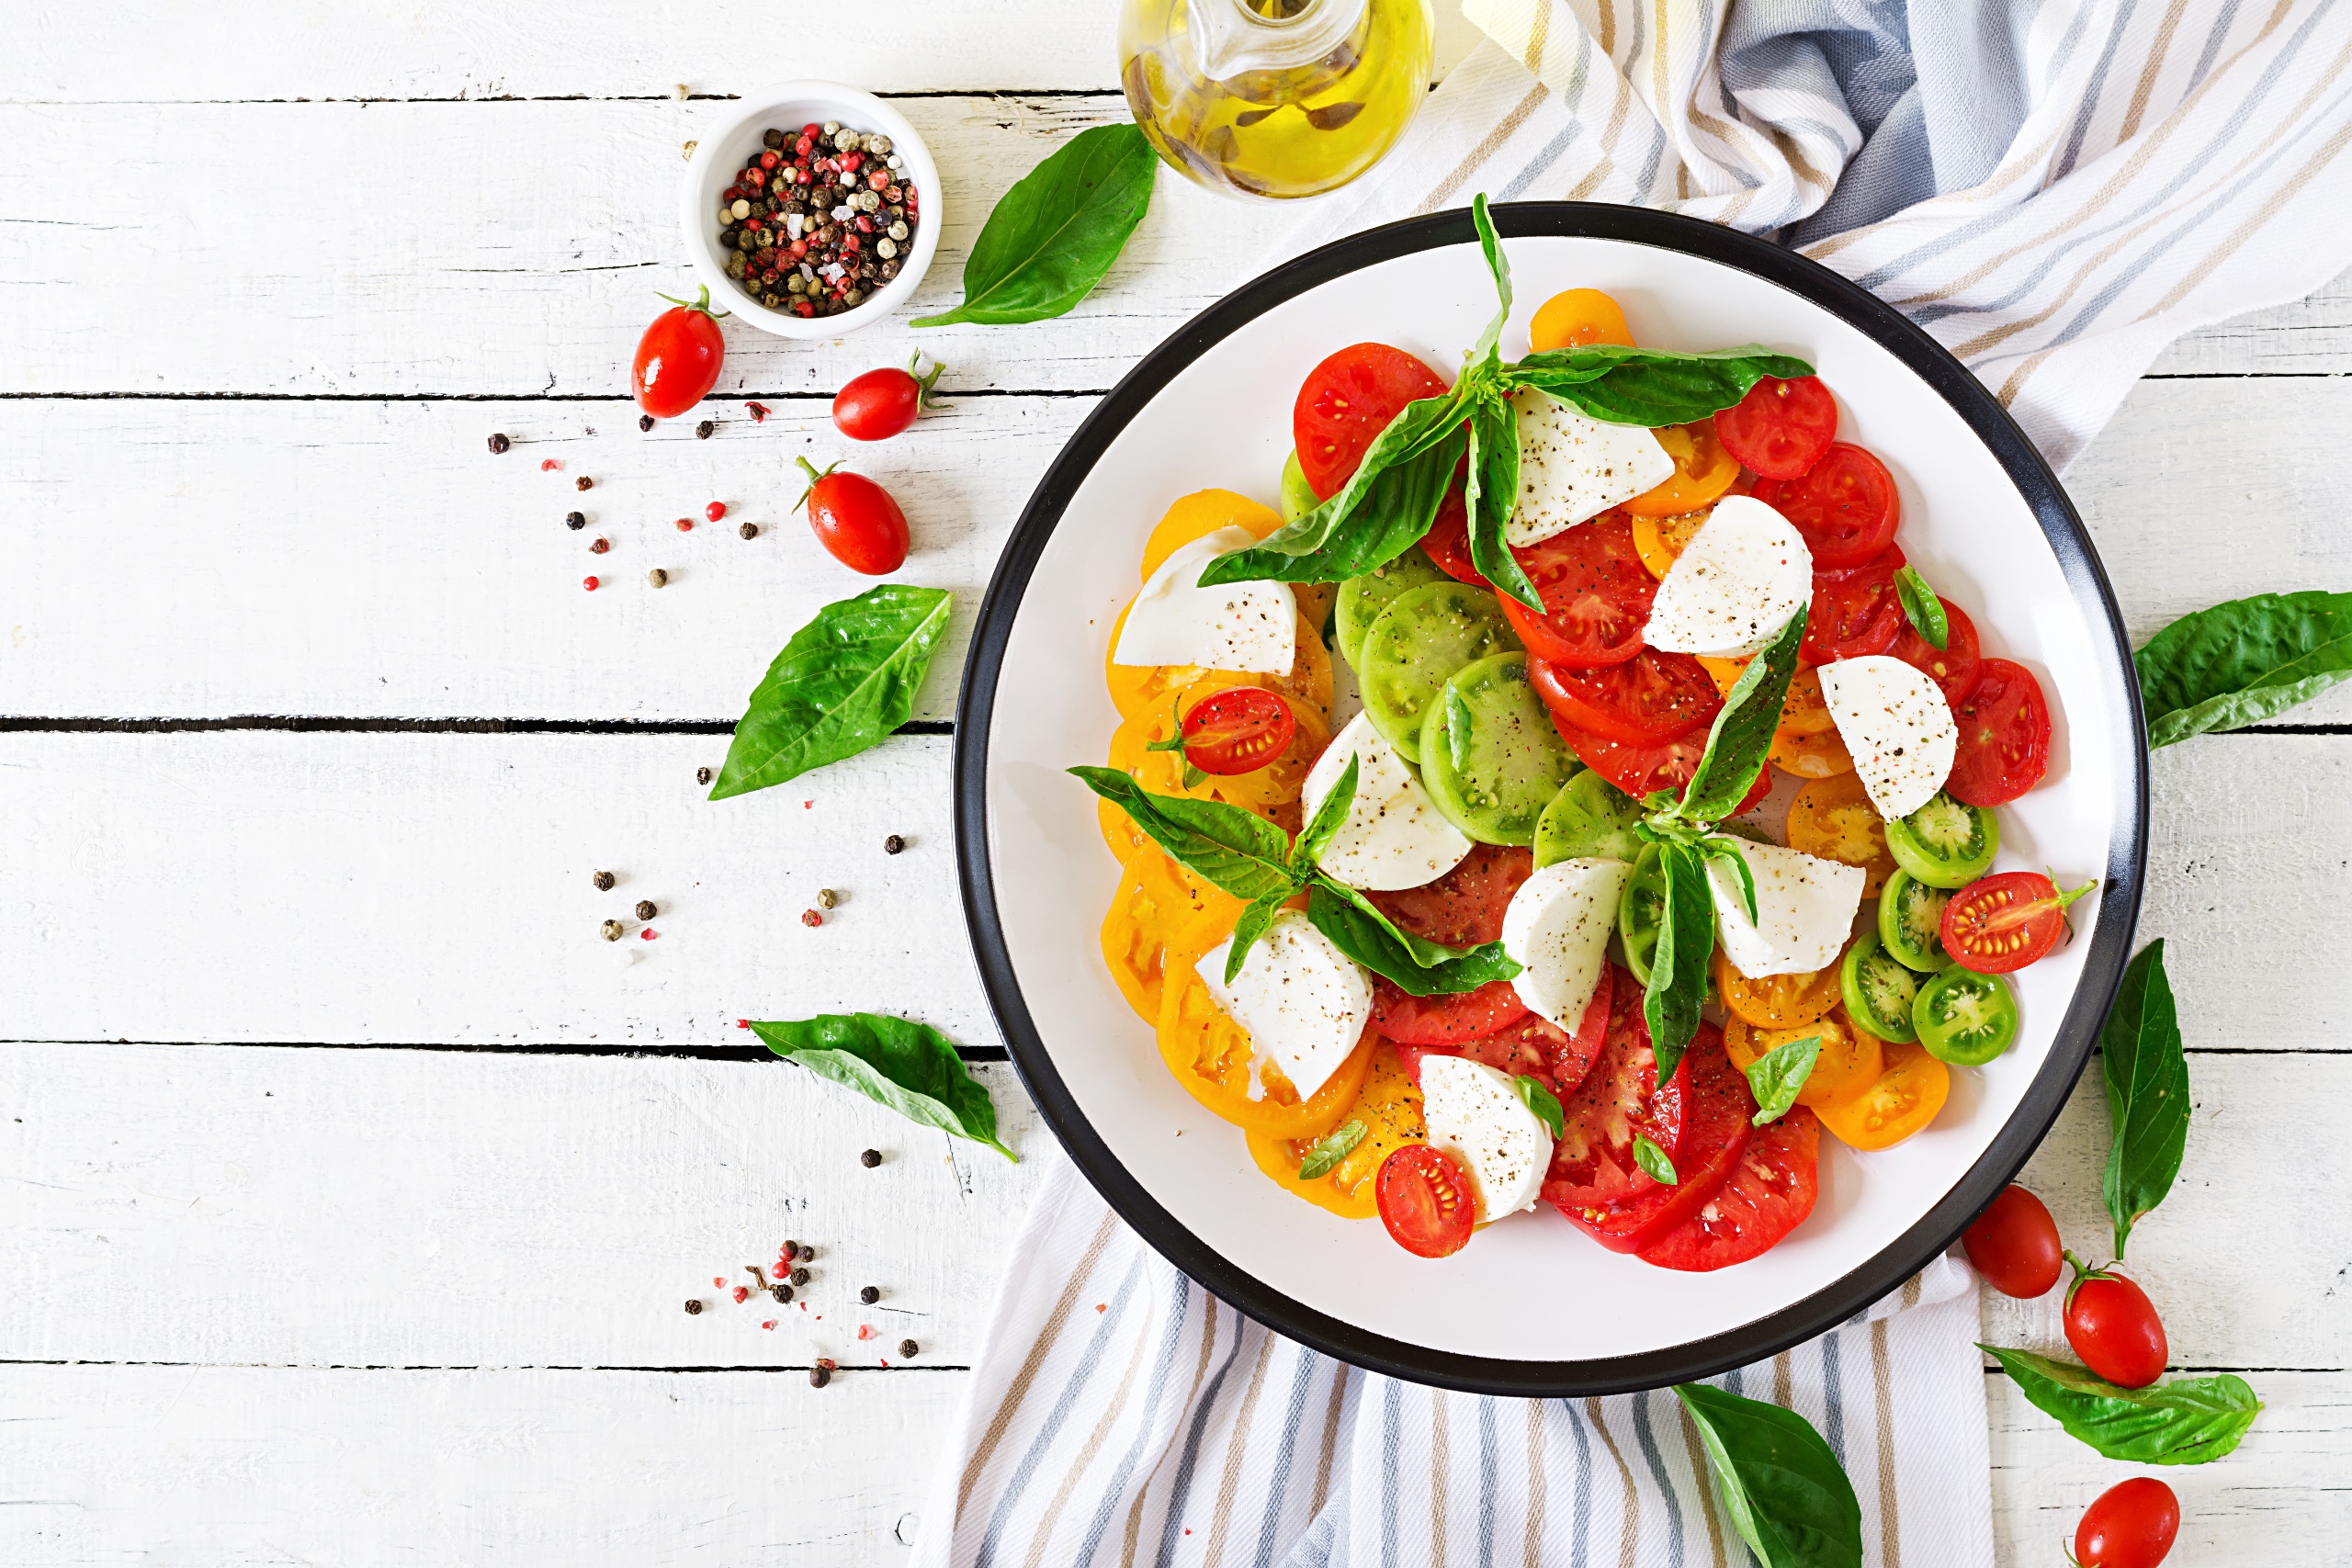 Food Salad Tomatoes Basil Mozzarella Black Pepper Spice Olive Oil Plates Wooden Surface Cheese 2560x1707